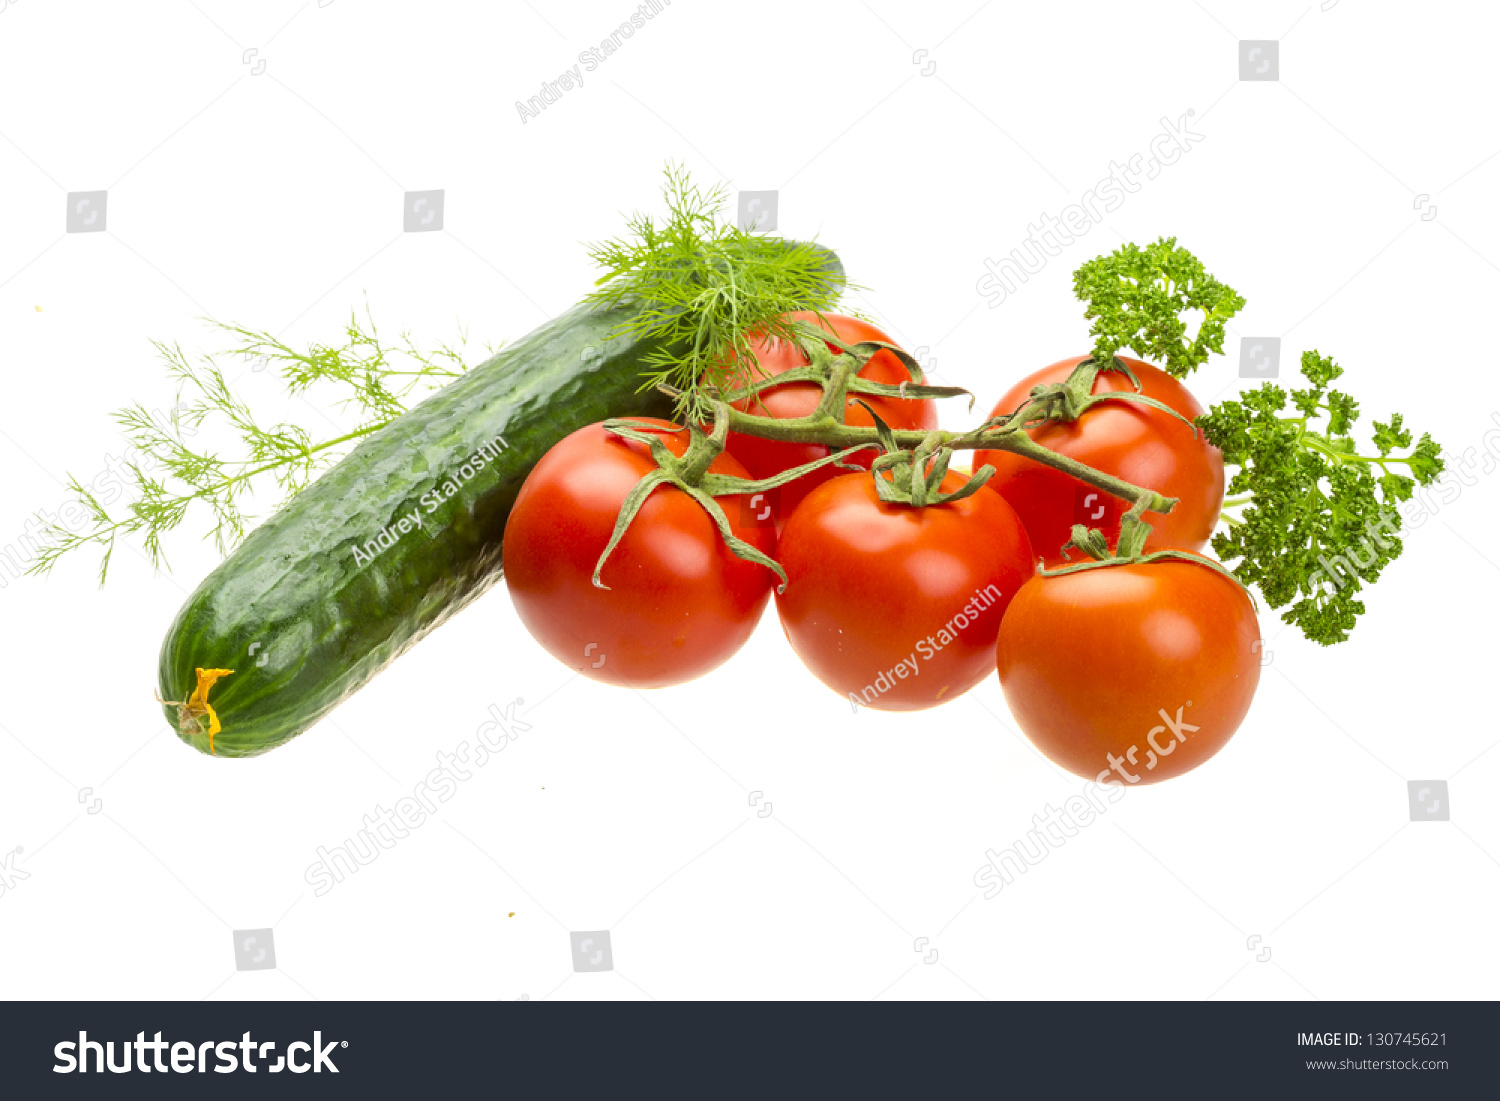 Red ripe tomatoes on the branch with parsley, dill, cucumber #130745621